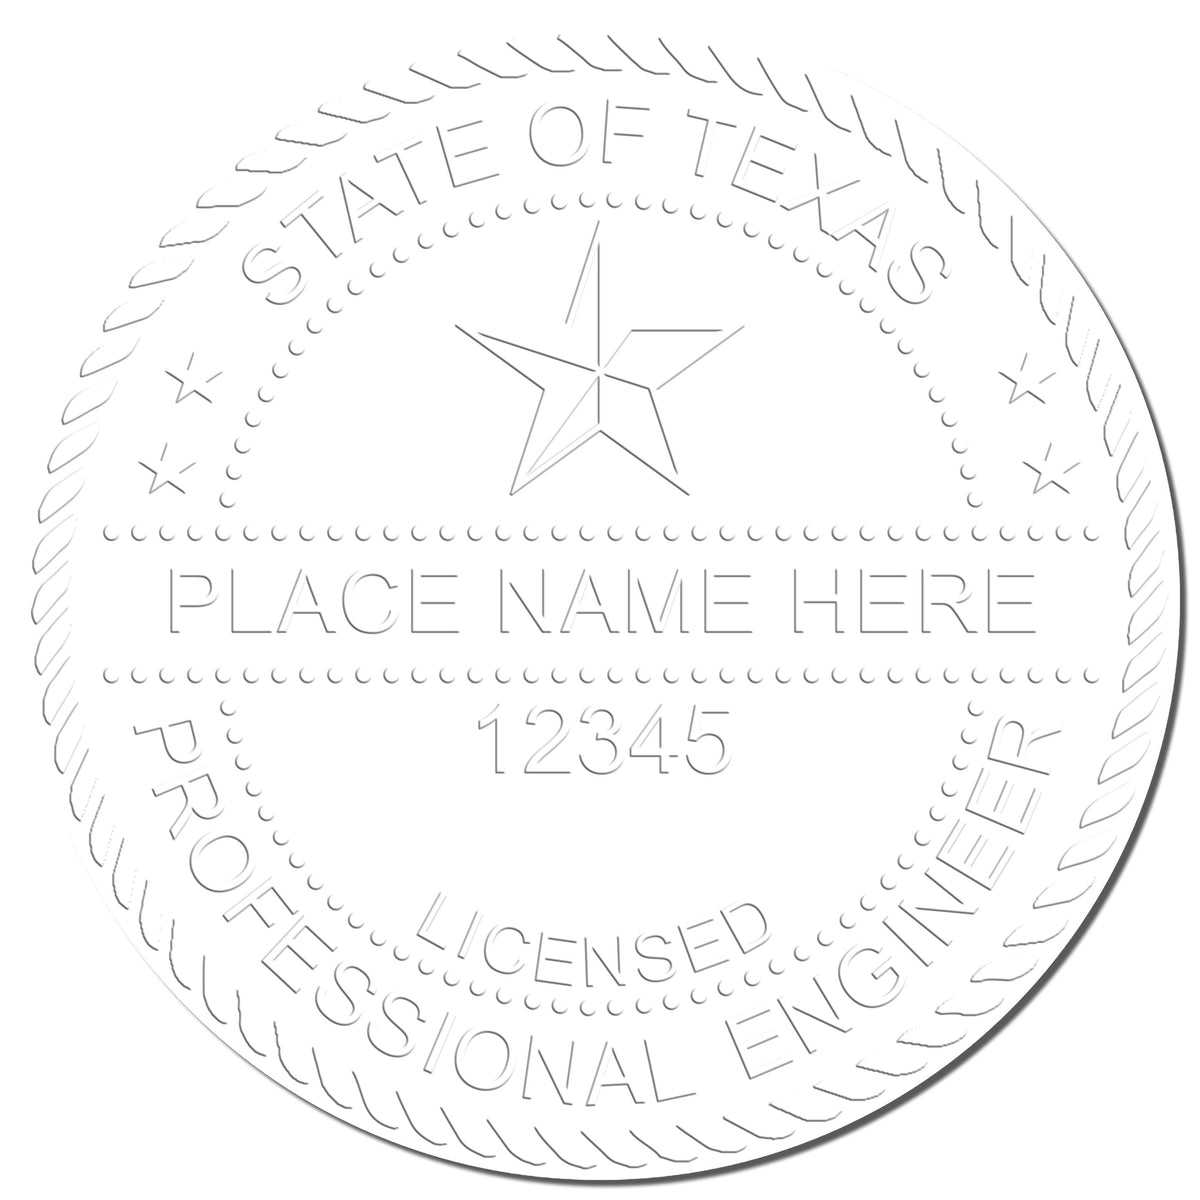 The Long Reach Texas PE Seal stamp impression comes to life with a crisp, detailed photo on paper - showcasing true professional quality.